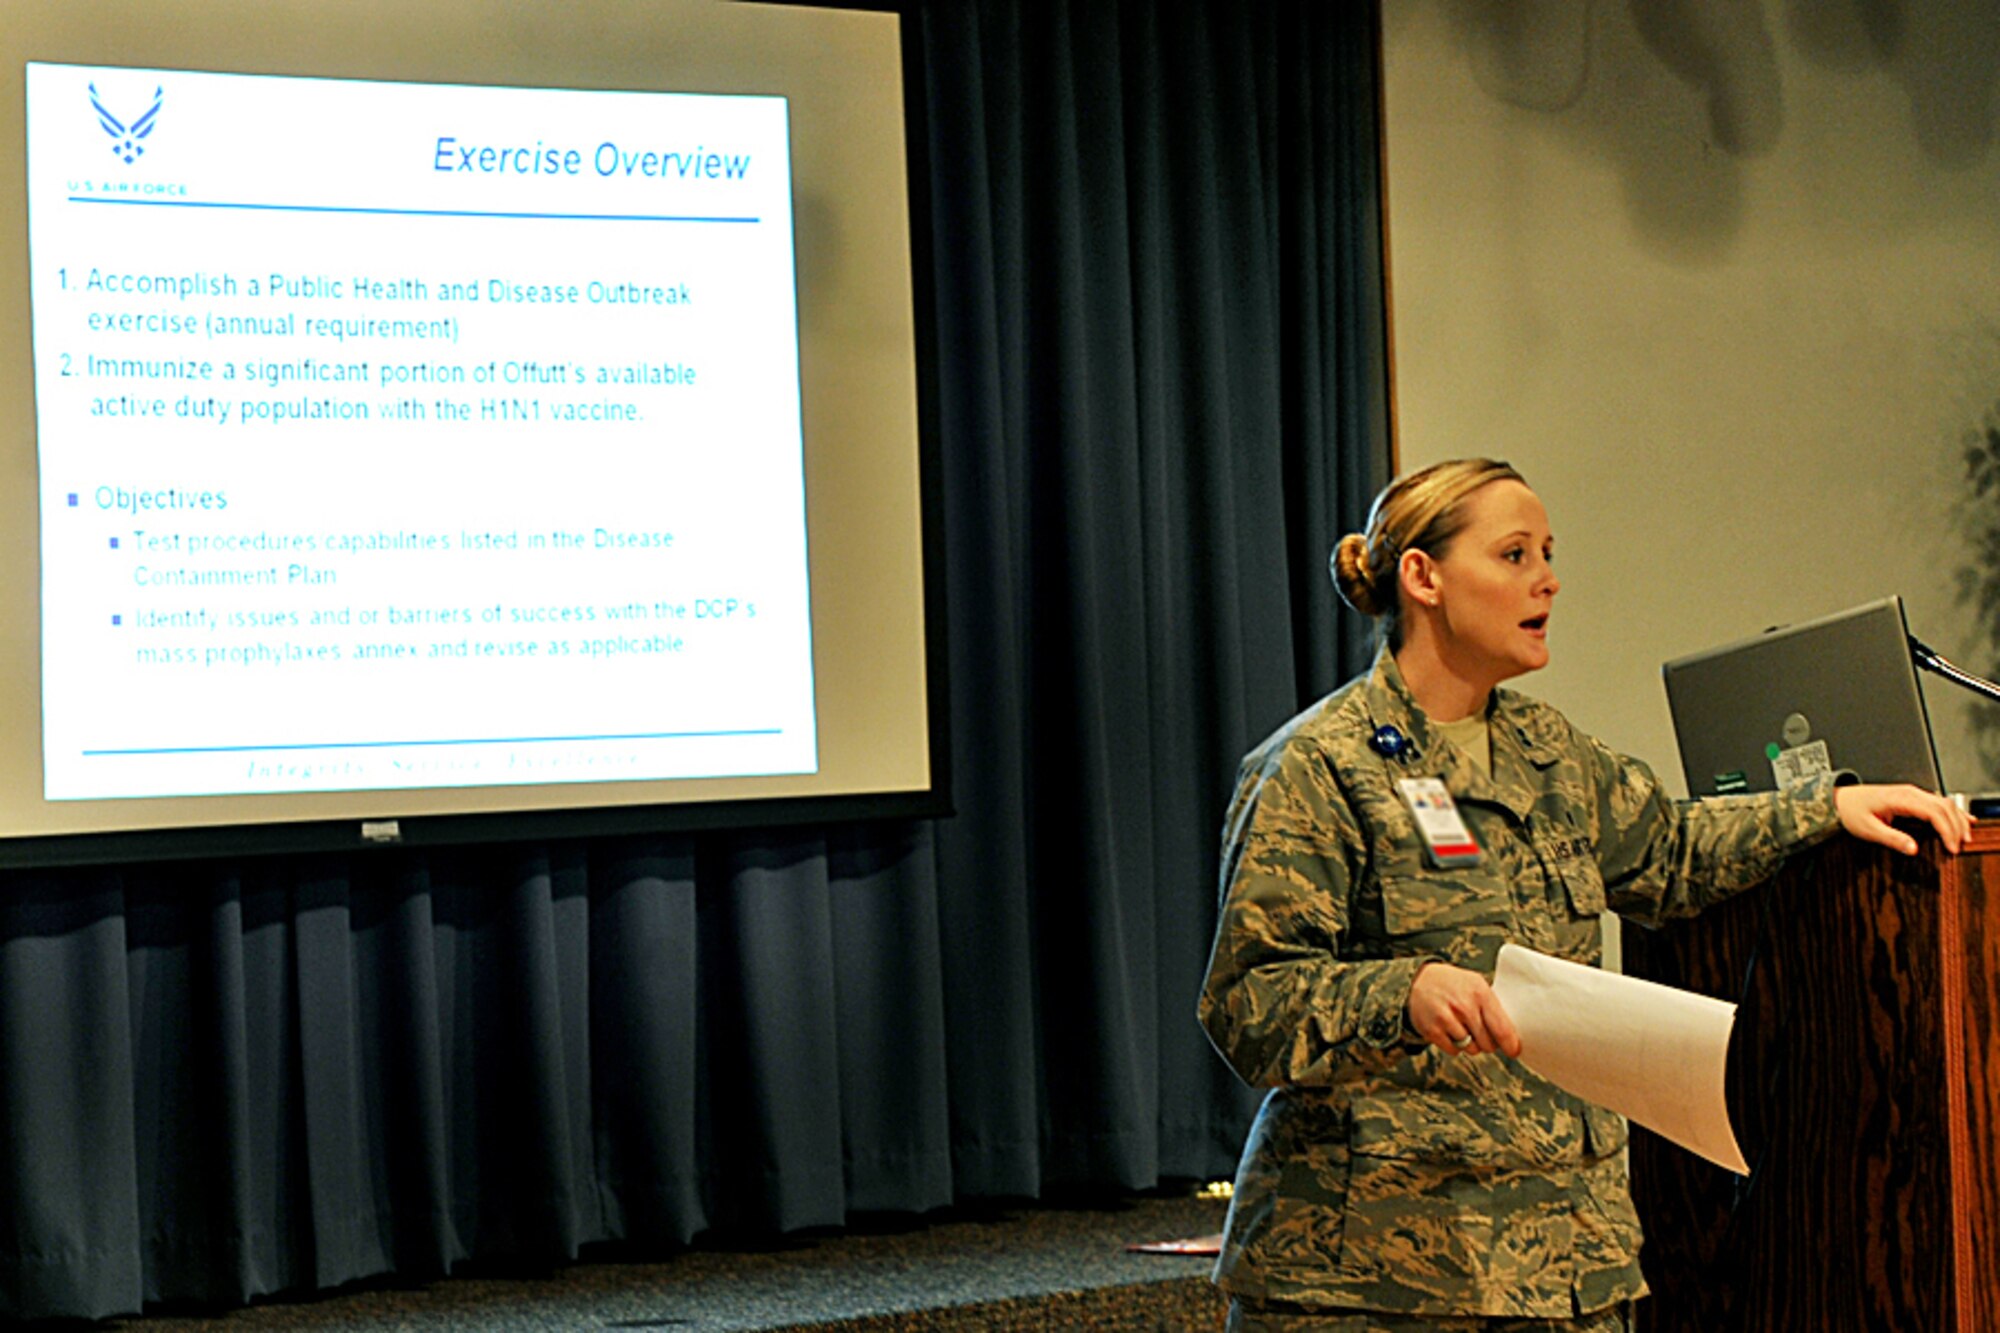 OFFUTT AIR FORCE BASE, Neb. - Capt. Marcie Lewis, with the 55th Medical Support Squadron, briefs members of Team Offutt on the disease containment plan during a Point of Distribution exercise Jan. 21 at the community center here. More than 1,000 active-duty personnel processed through the center to test the 55th Wing's ability to respond to a public health emergency.  Many received their H1N1 inoculation during the event. U.S. Air Force photo by Charles Haymond 

